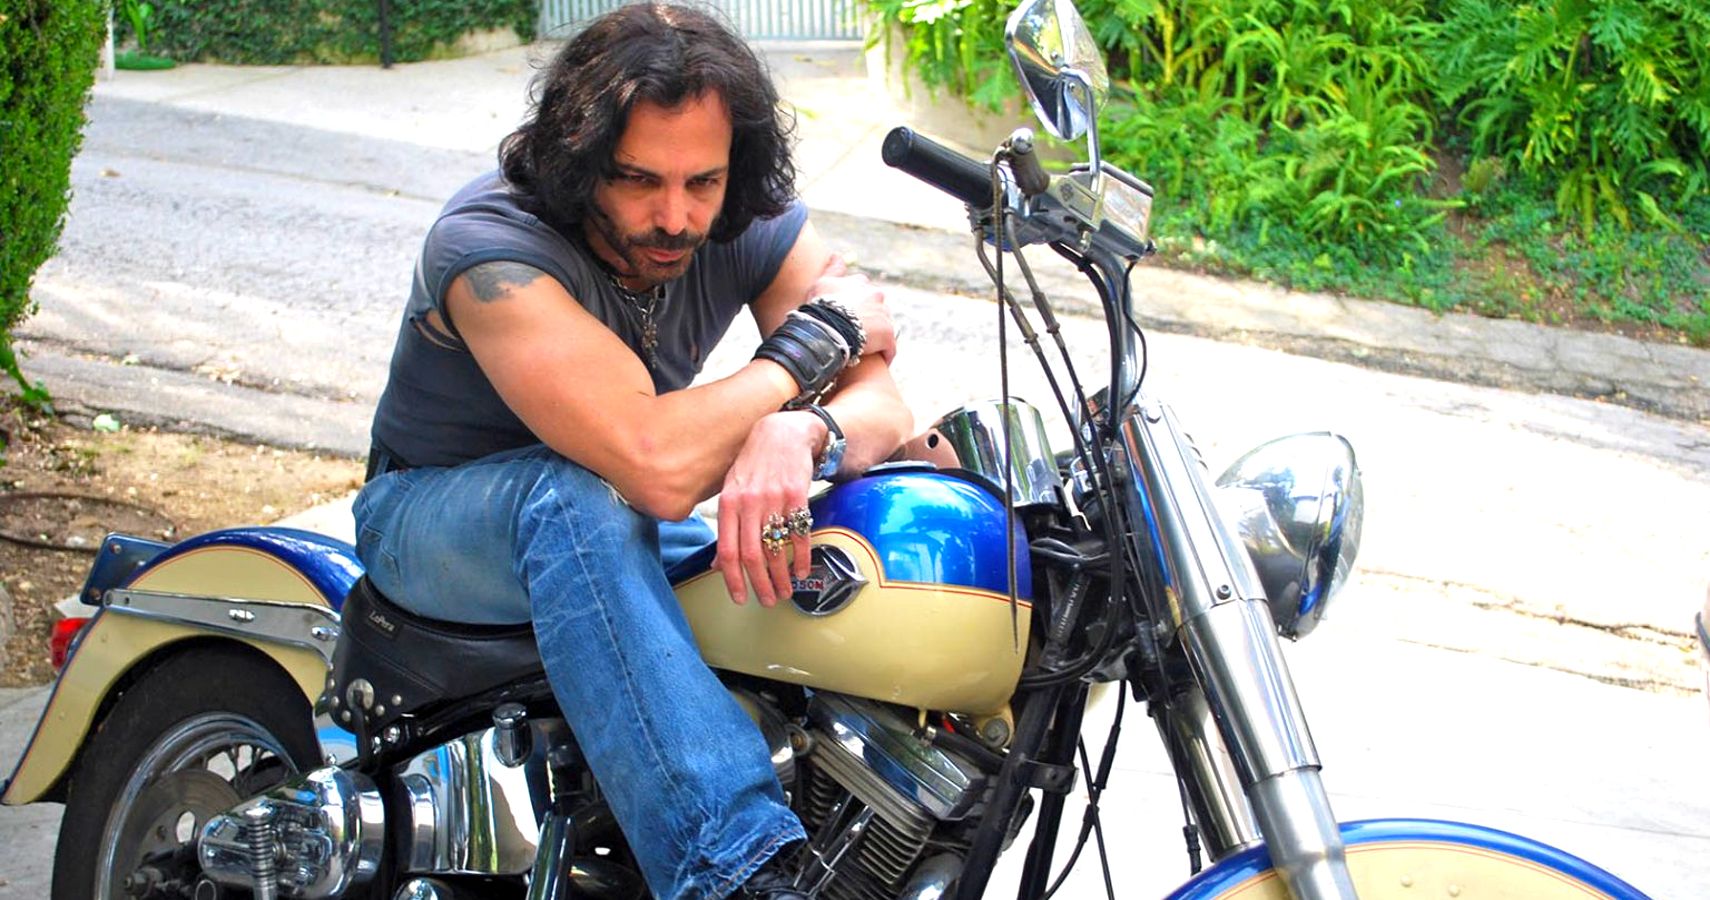 Richard Grieco is a massive fan of motorcycles